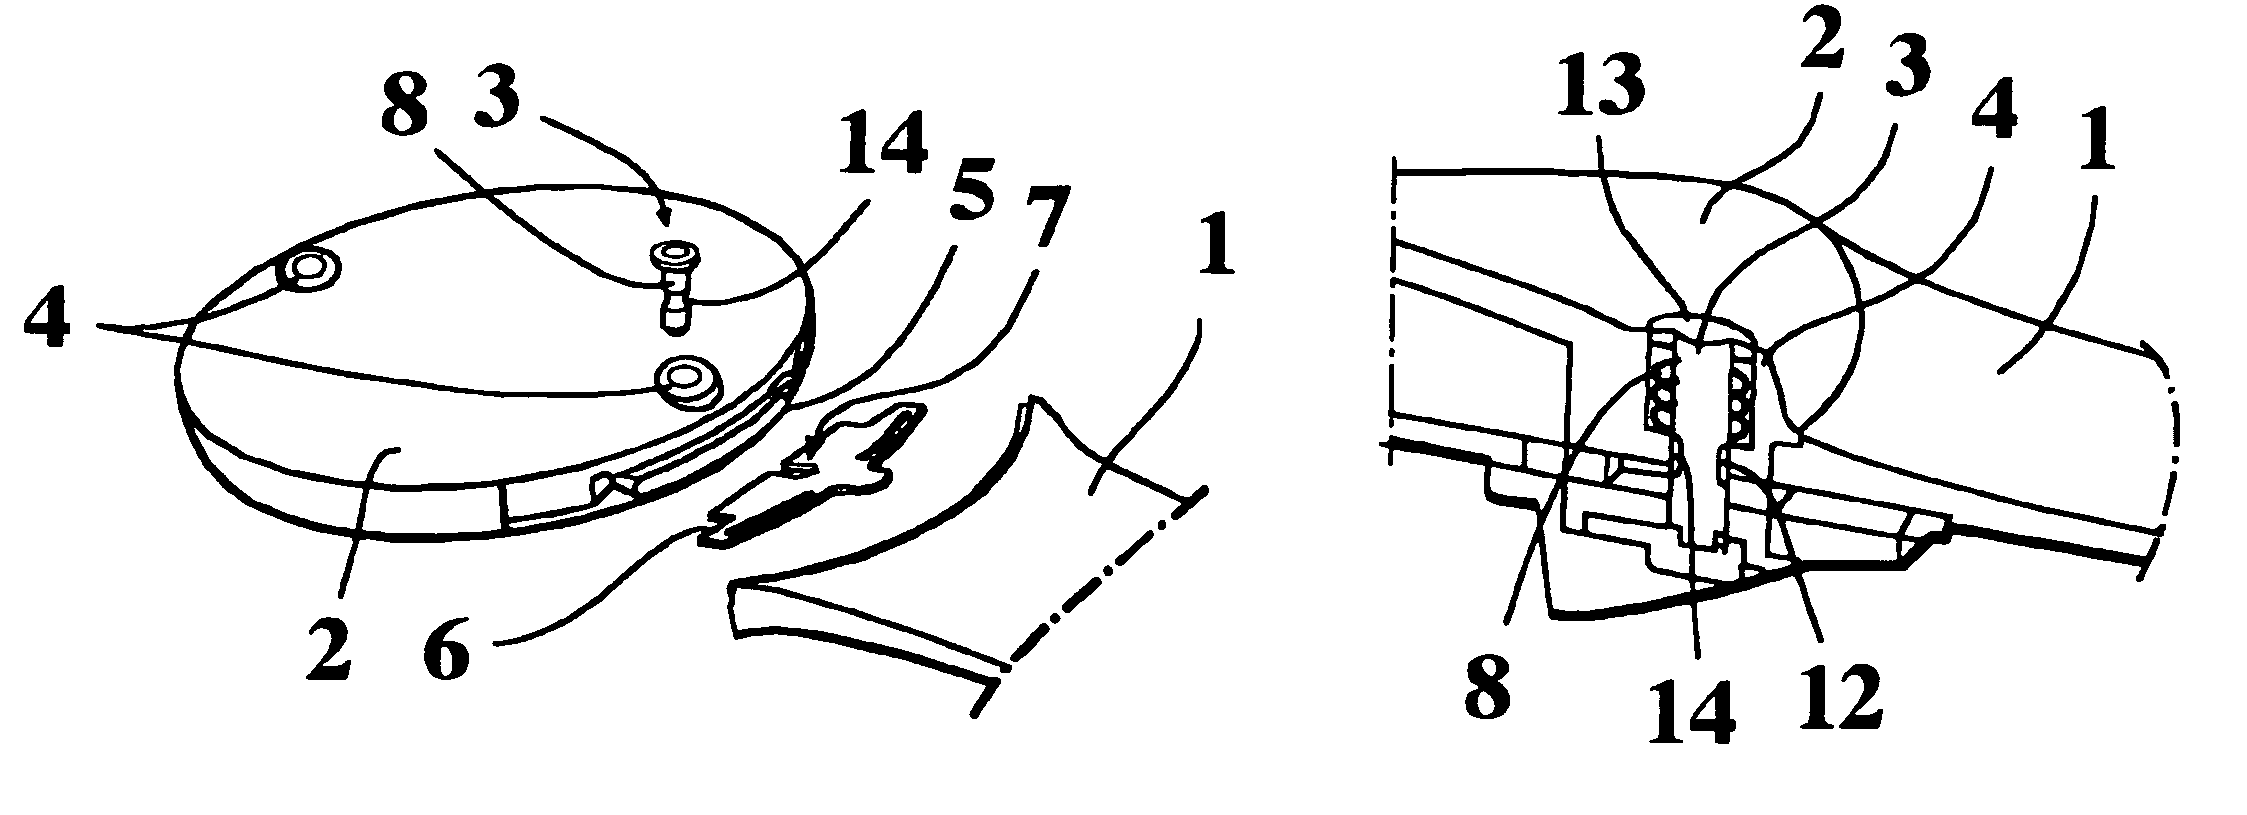 Strap attachment assembly